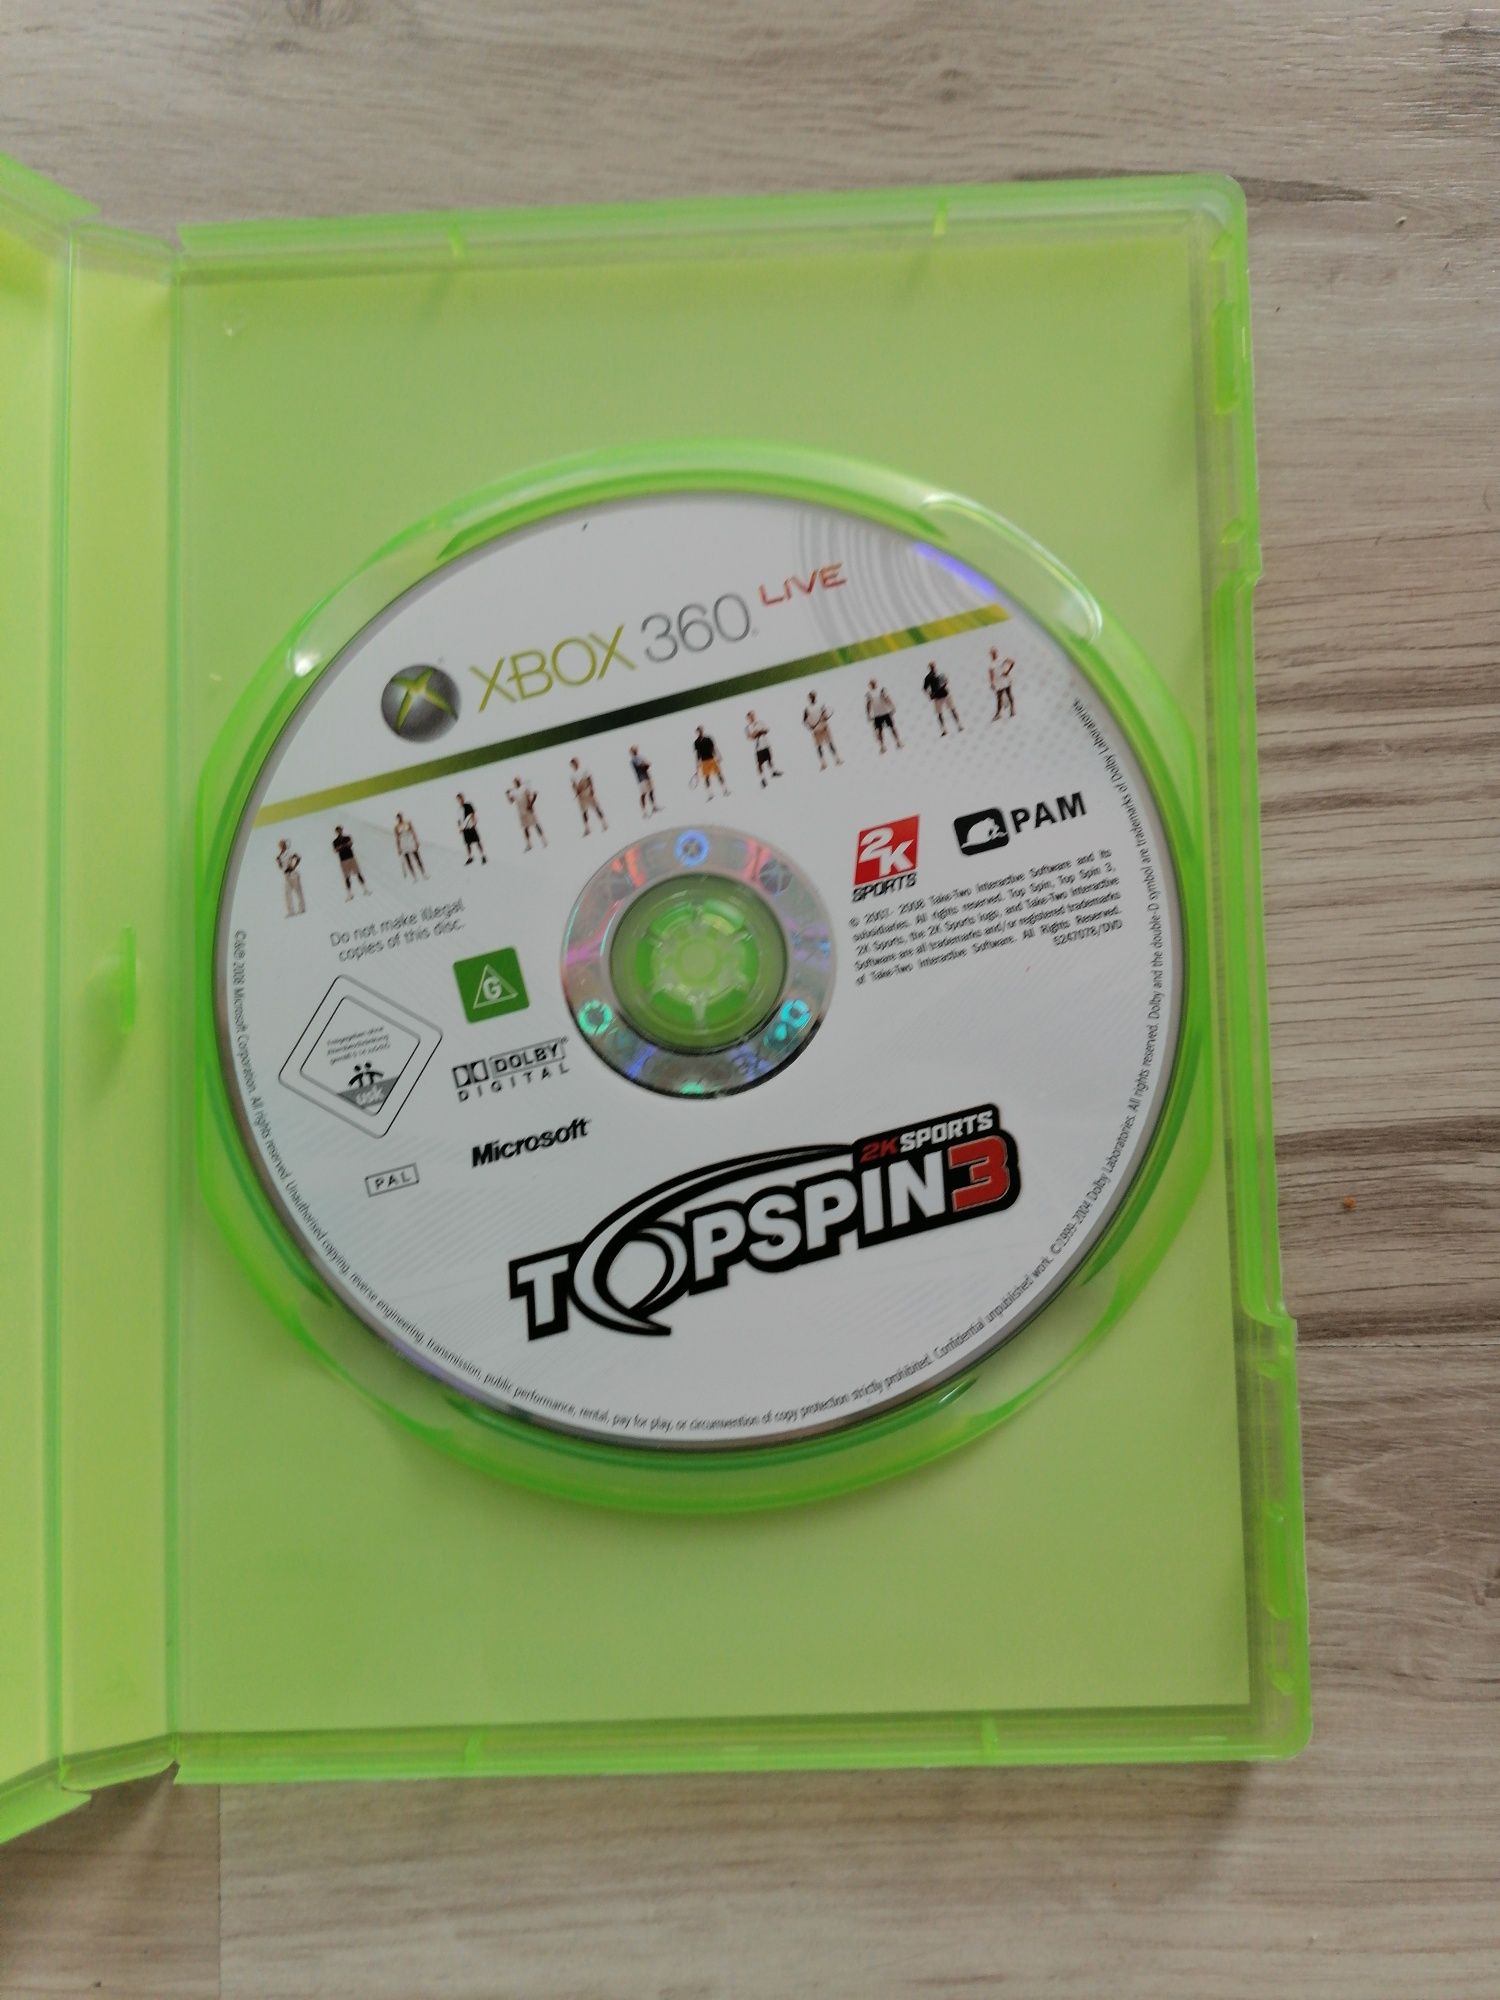 Top spin 3 Xbox 360